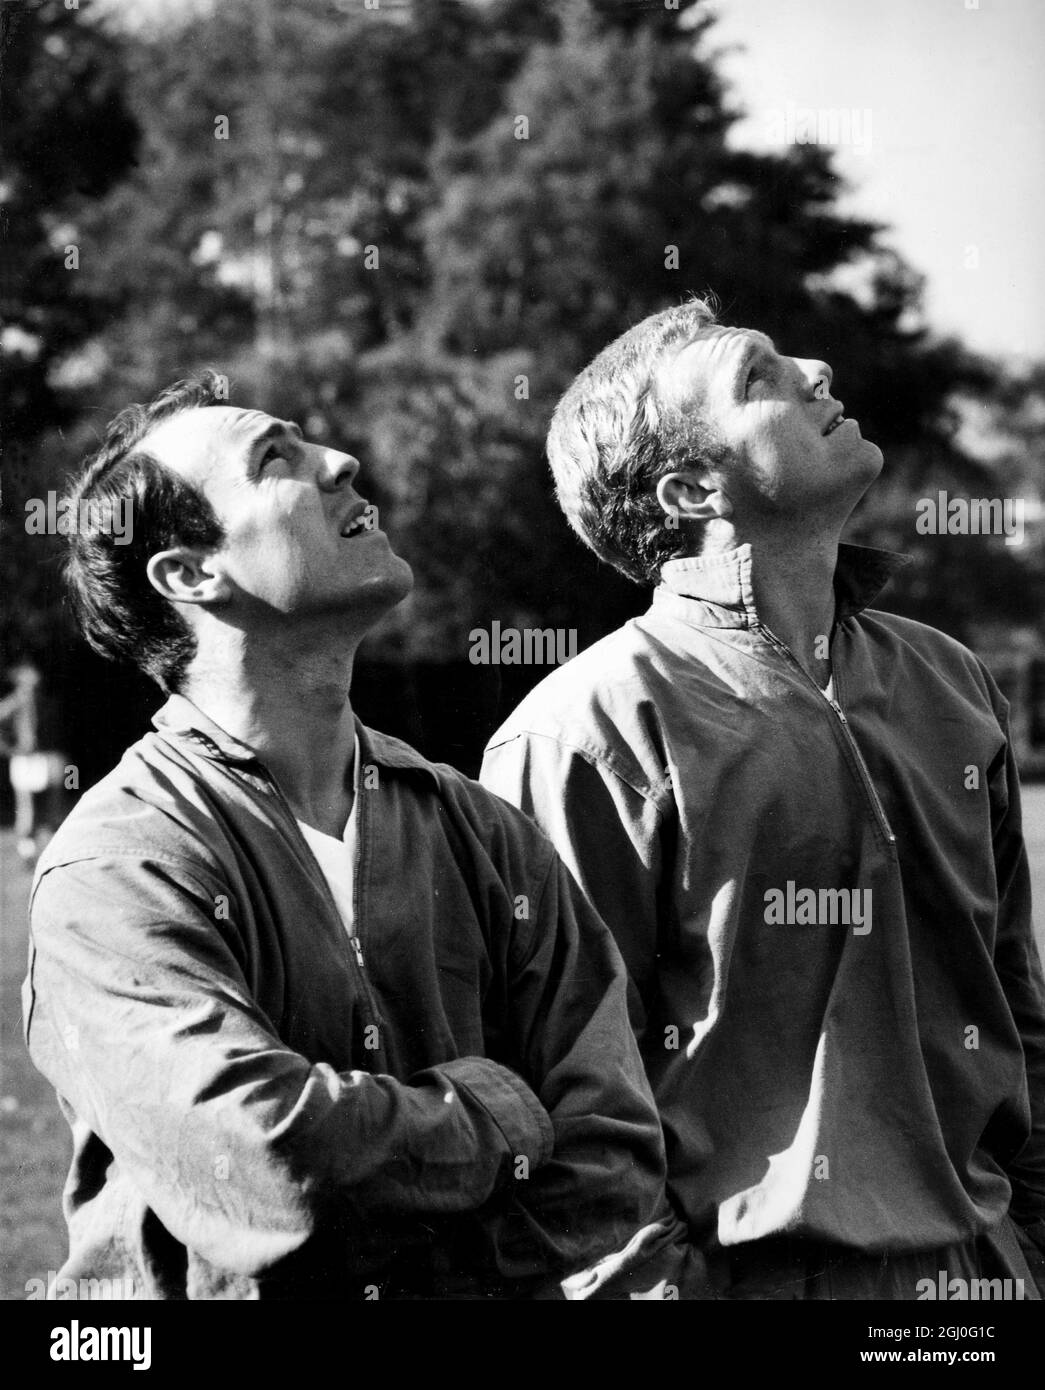 England players, Jimmy Greaves (left) and Bobby Moore (right), are distracted by an aircraft during their training session at Roehampton, Surrey. They are competing against The Rest Of The World at Wembley on the 23rd October 1963. 22nd October 1963 Stock Photo